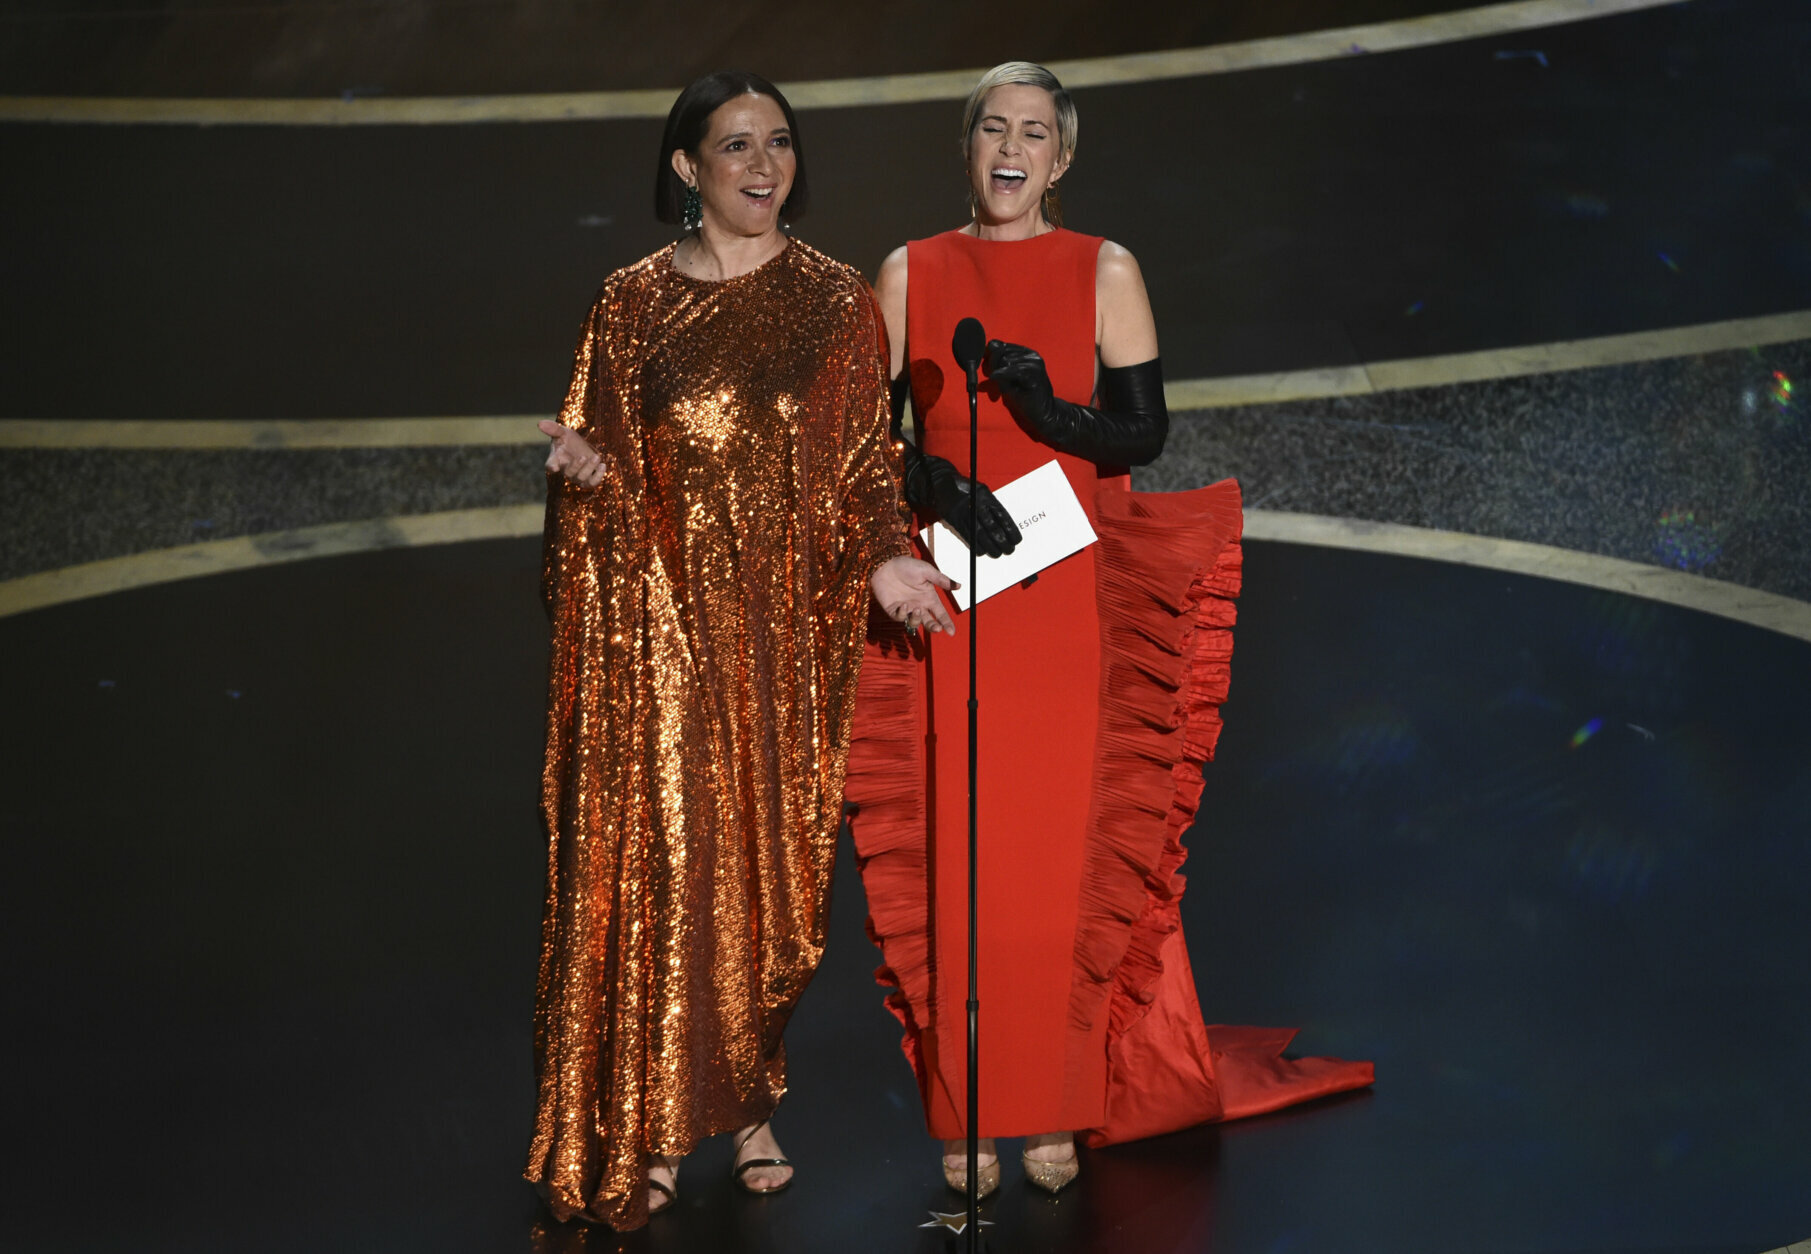 Maya Rudolph, left, and Kristen Wiig present the award for best costume design at the Oscars on Sunday, Feb. 9, 2020, at the Dolby Theatre in Los Angeles. (AP Photo/Chris Pizzello)